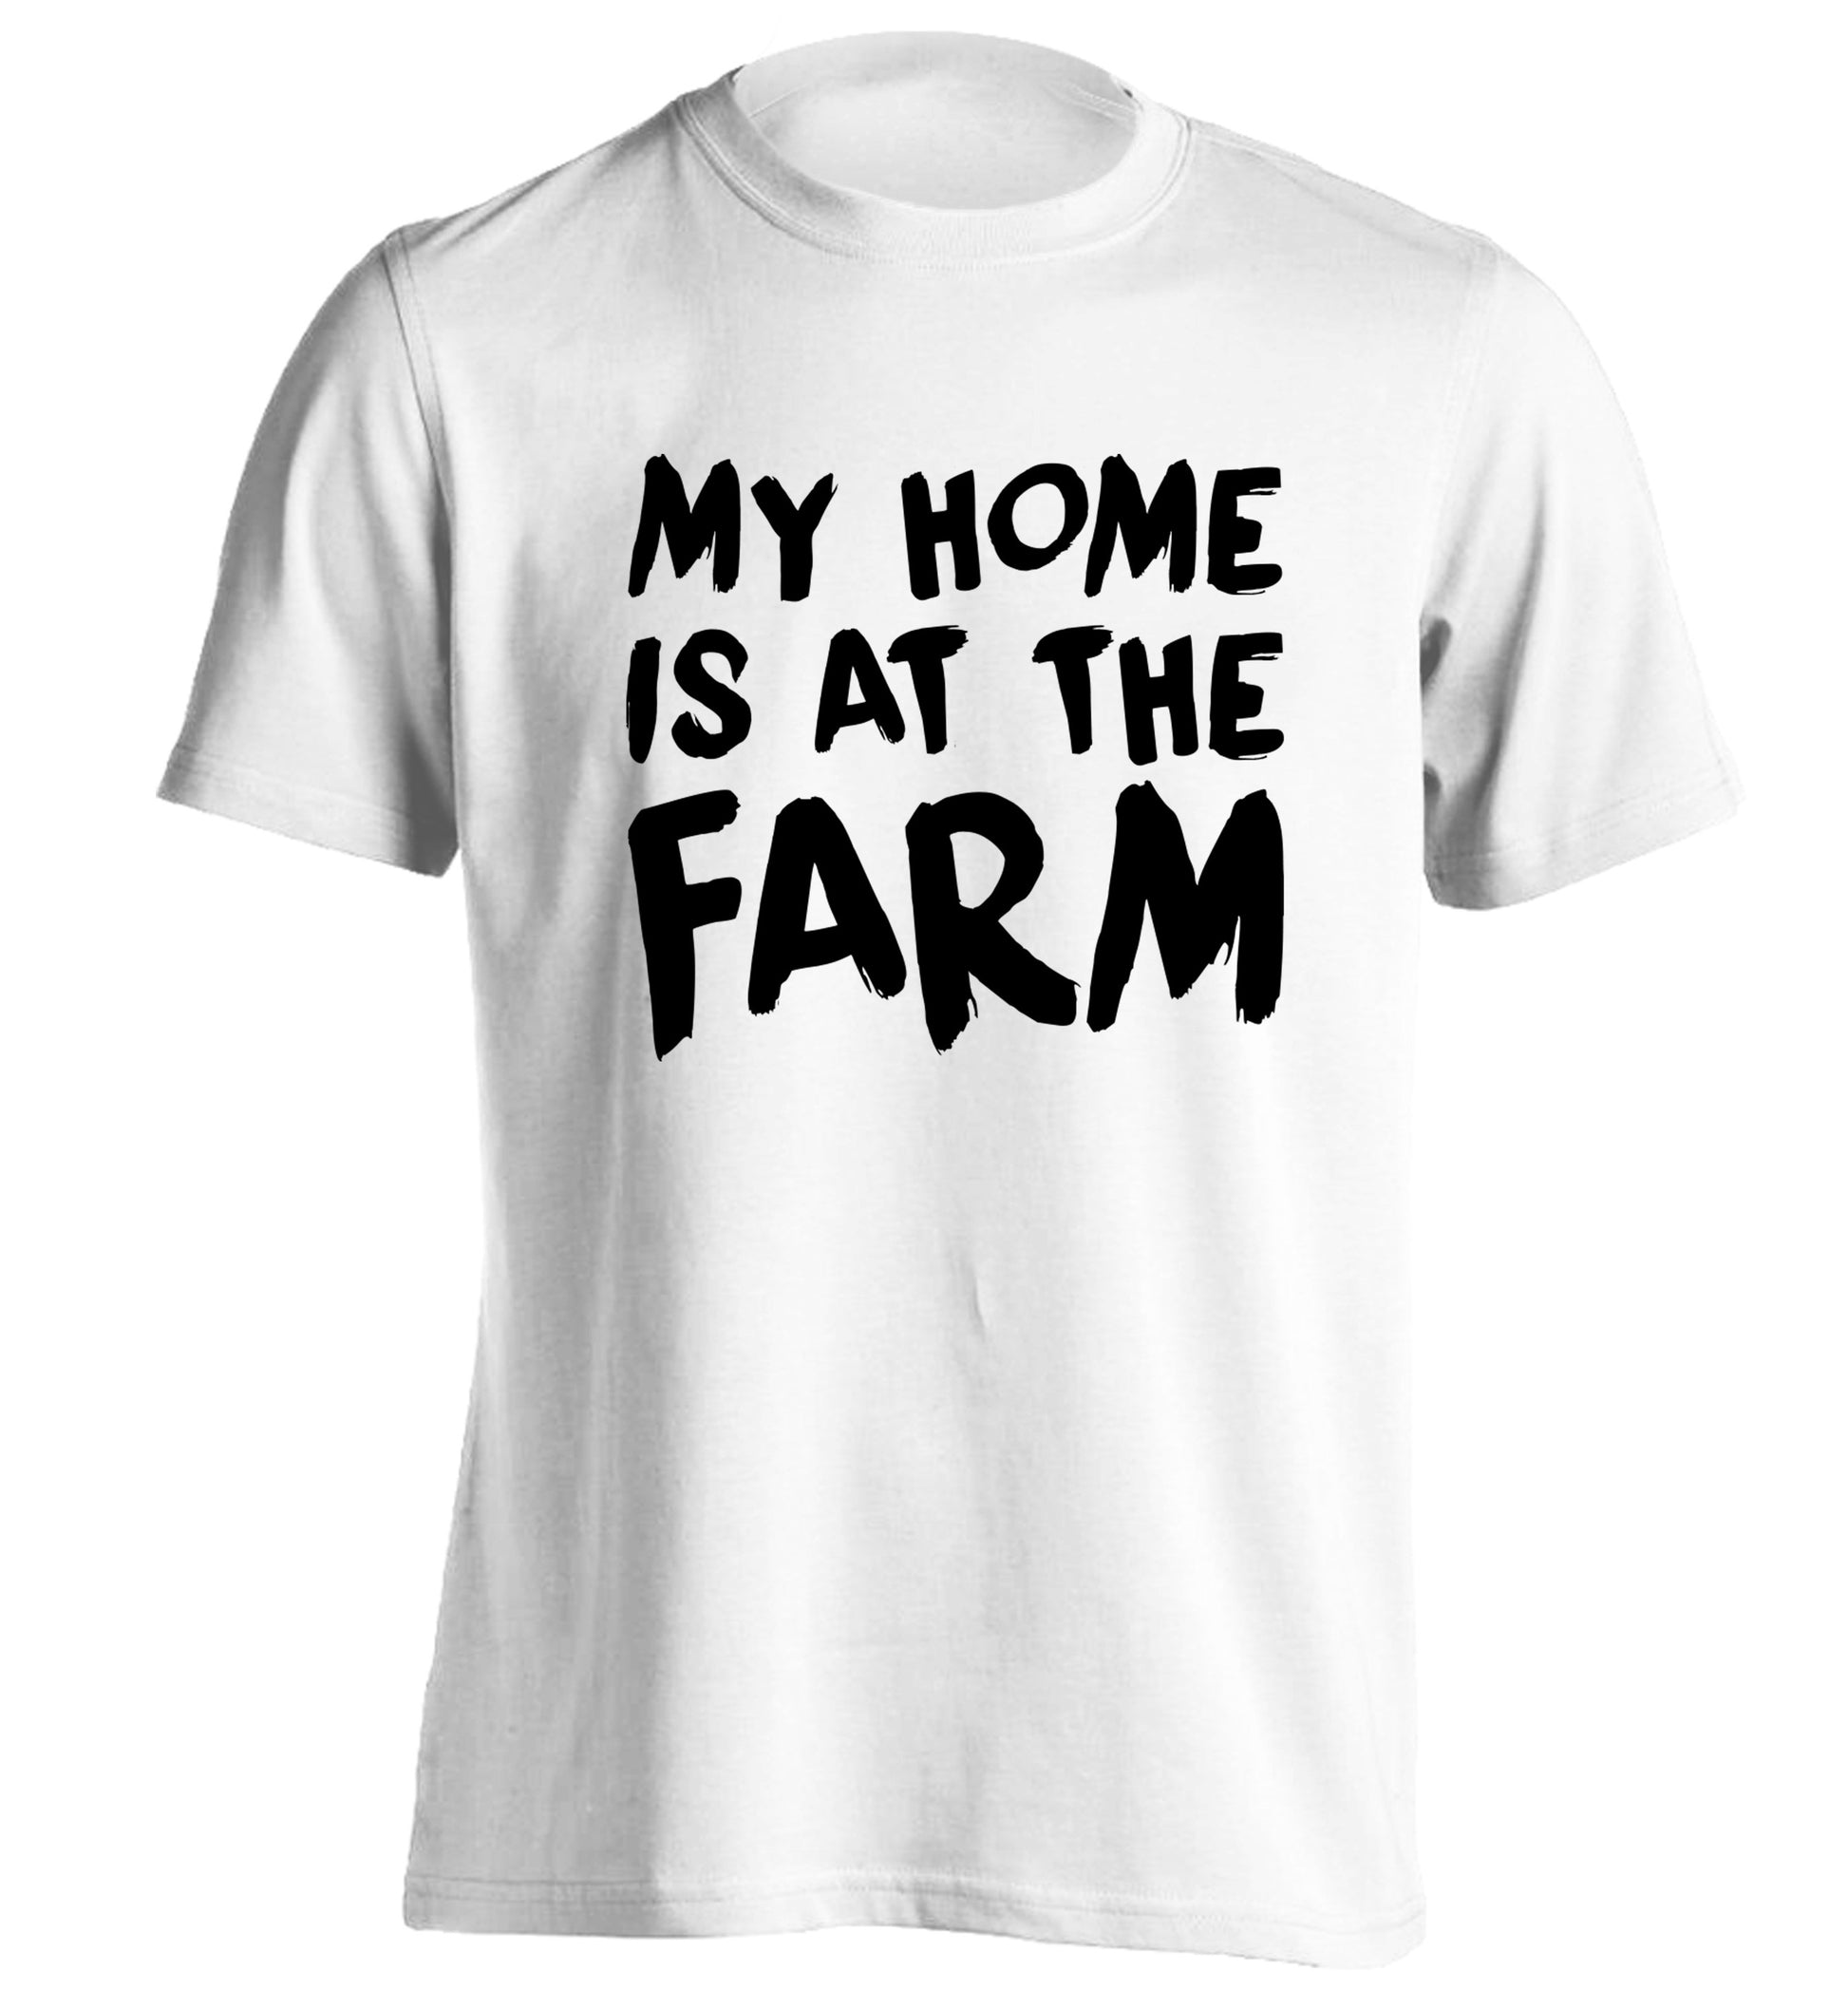 My home is at the farm adults unisex white Tshirt 2XL